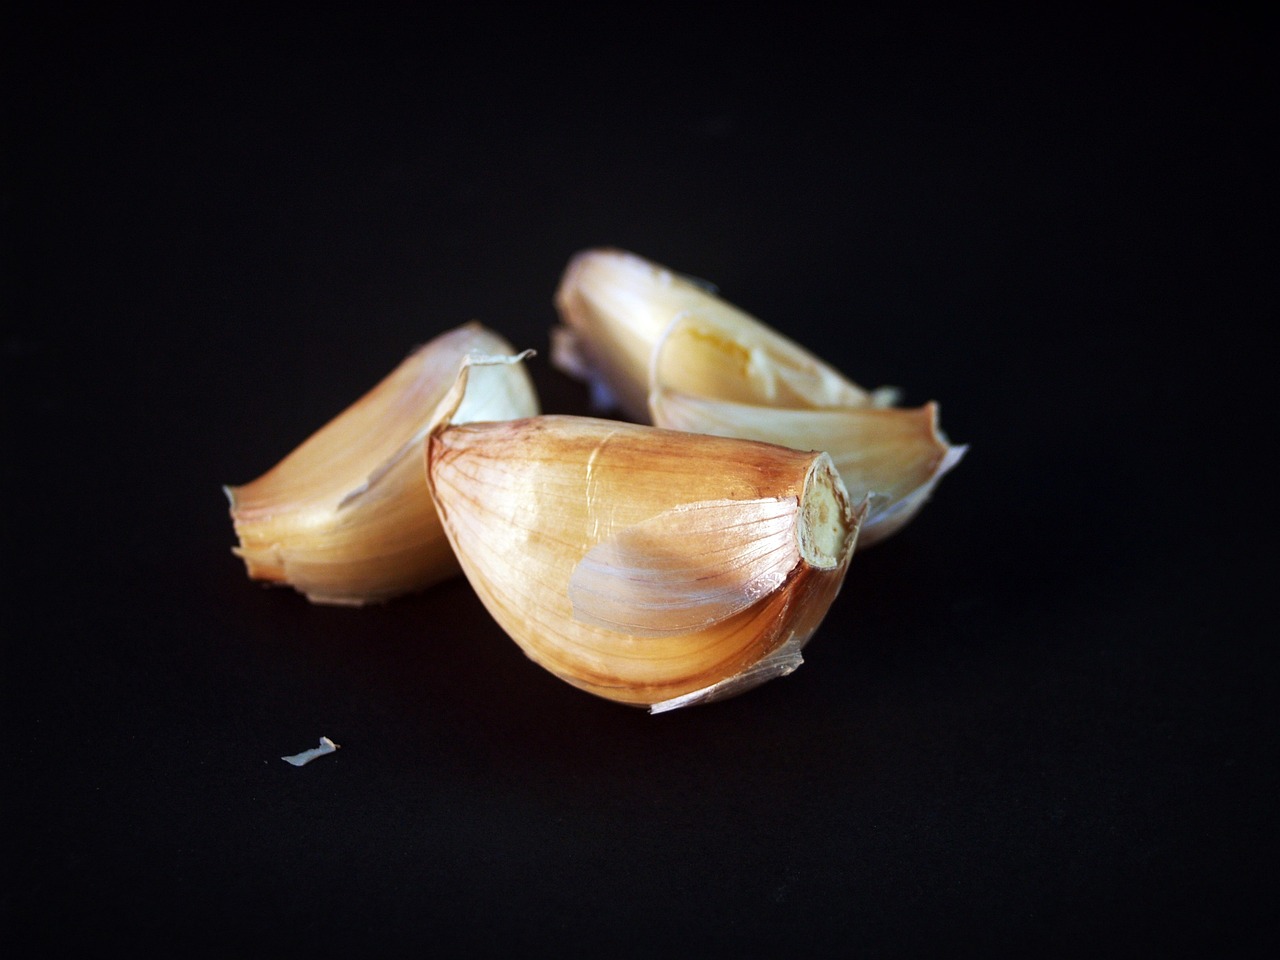 a couple of cloves of garlic on a black surface, a macro photograph, by Tom Carapic, miniature product photo, high detail product photo, chicken, productphoto